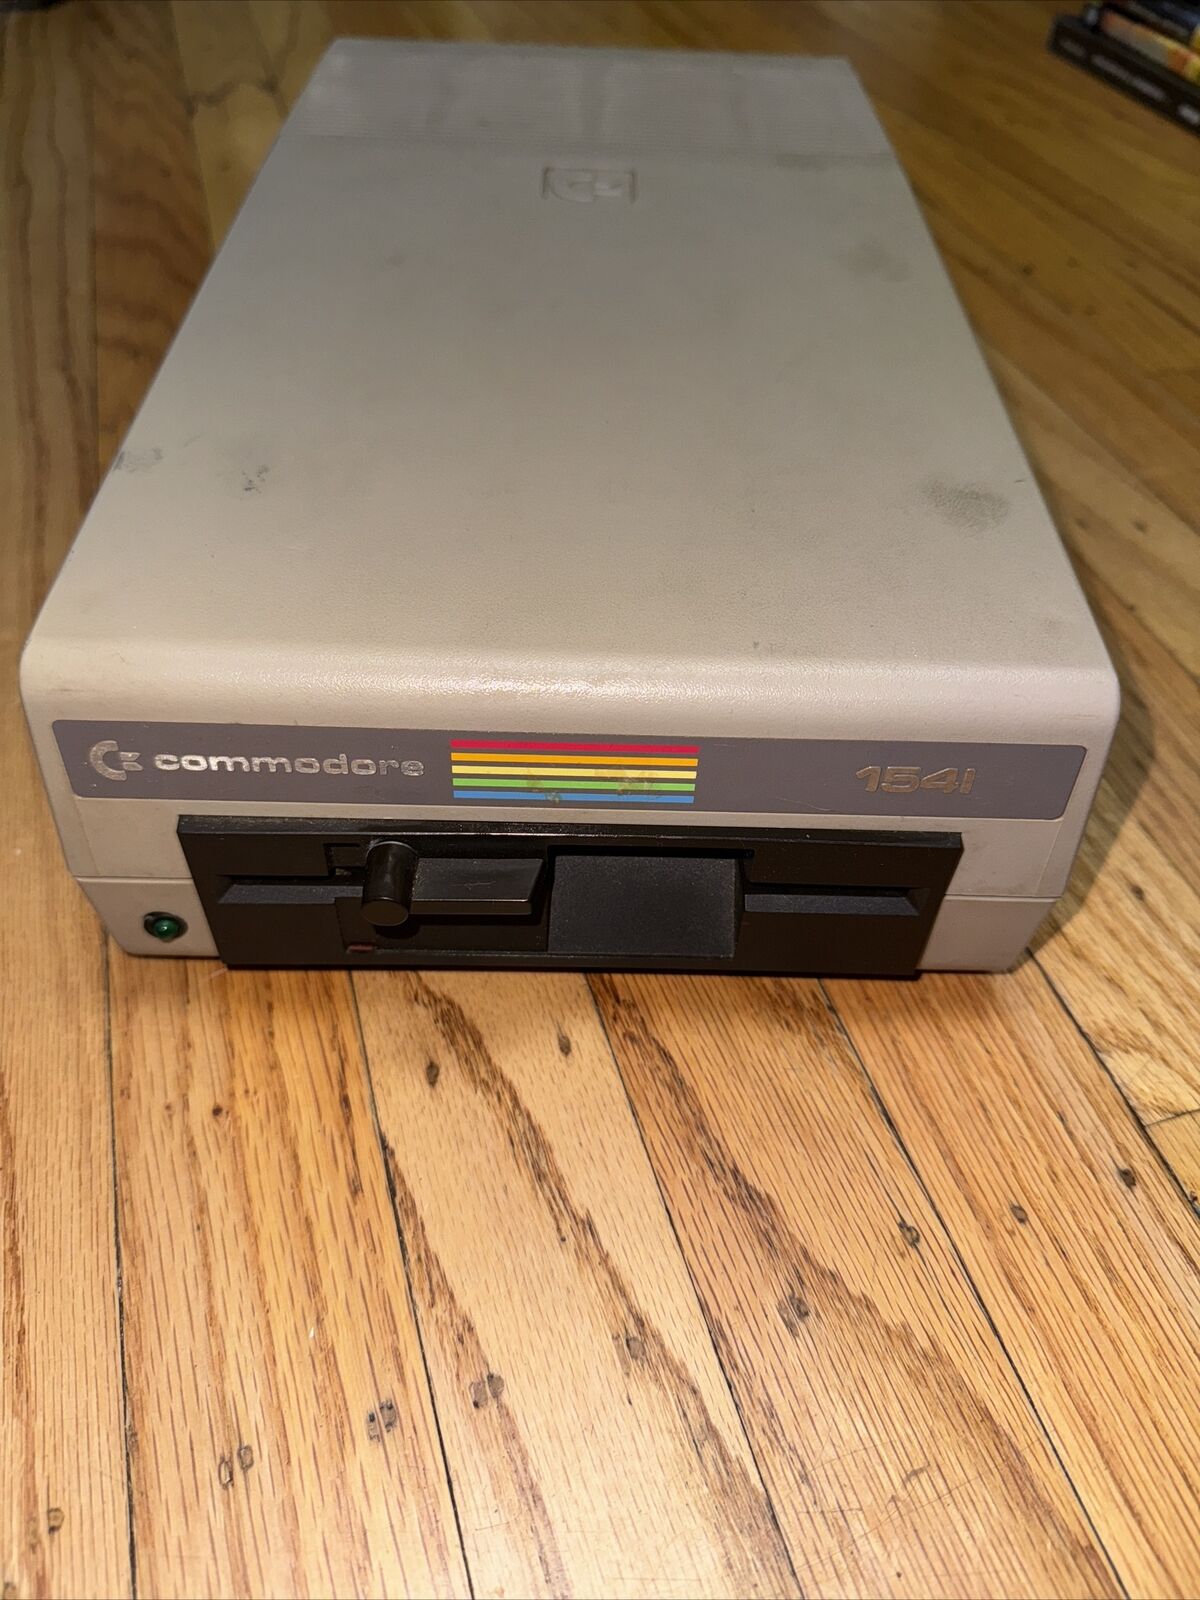 Vtg Commodore 64 128 Computer Model 1541 Single Drive Floppy Disk Drive UNTESTED